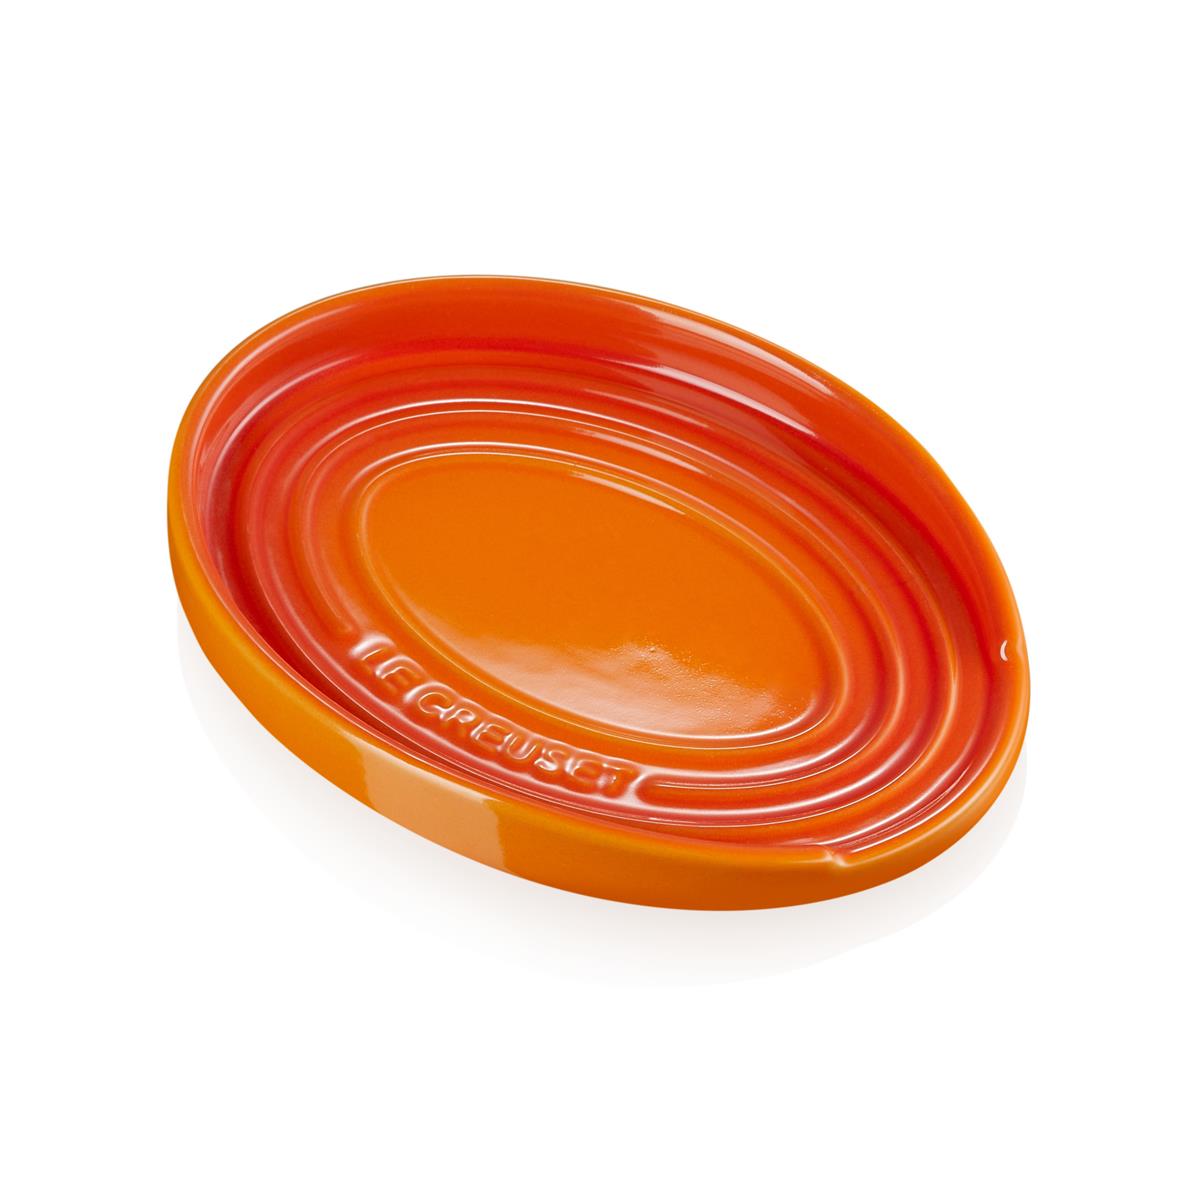 What is the maximum heat resistance of the Le Creuset spoon rest?